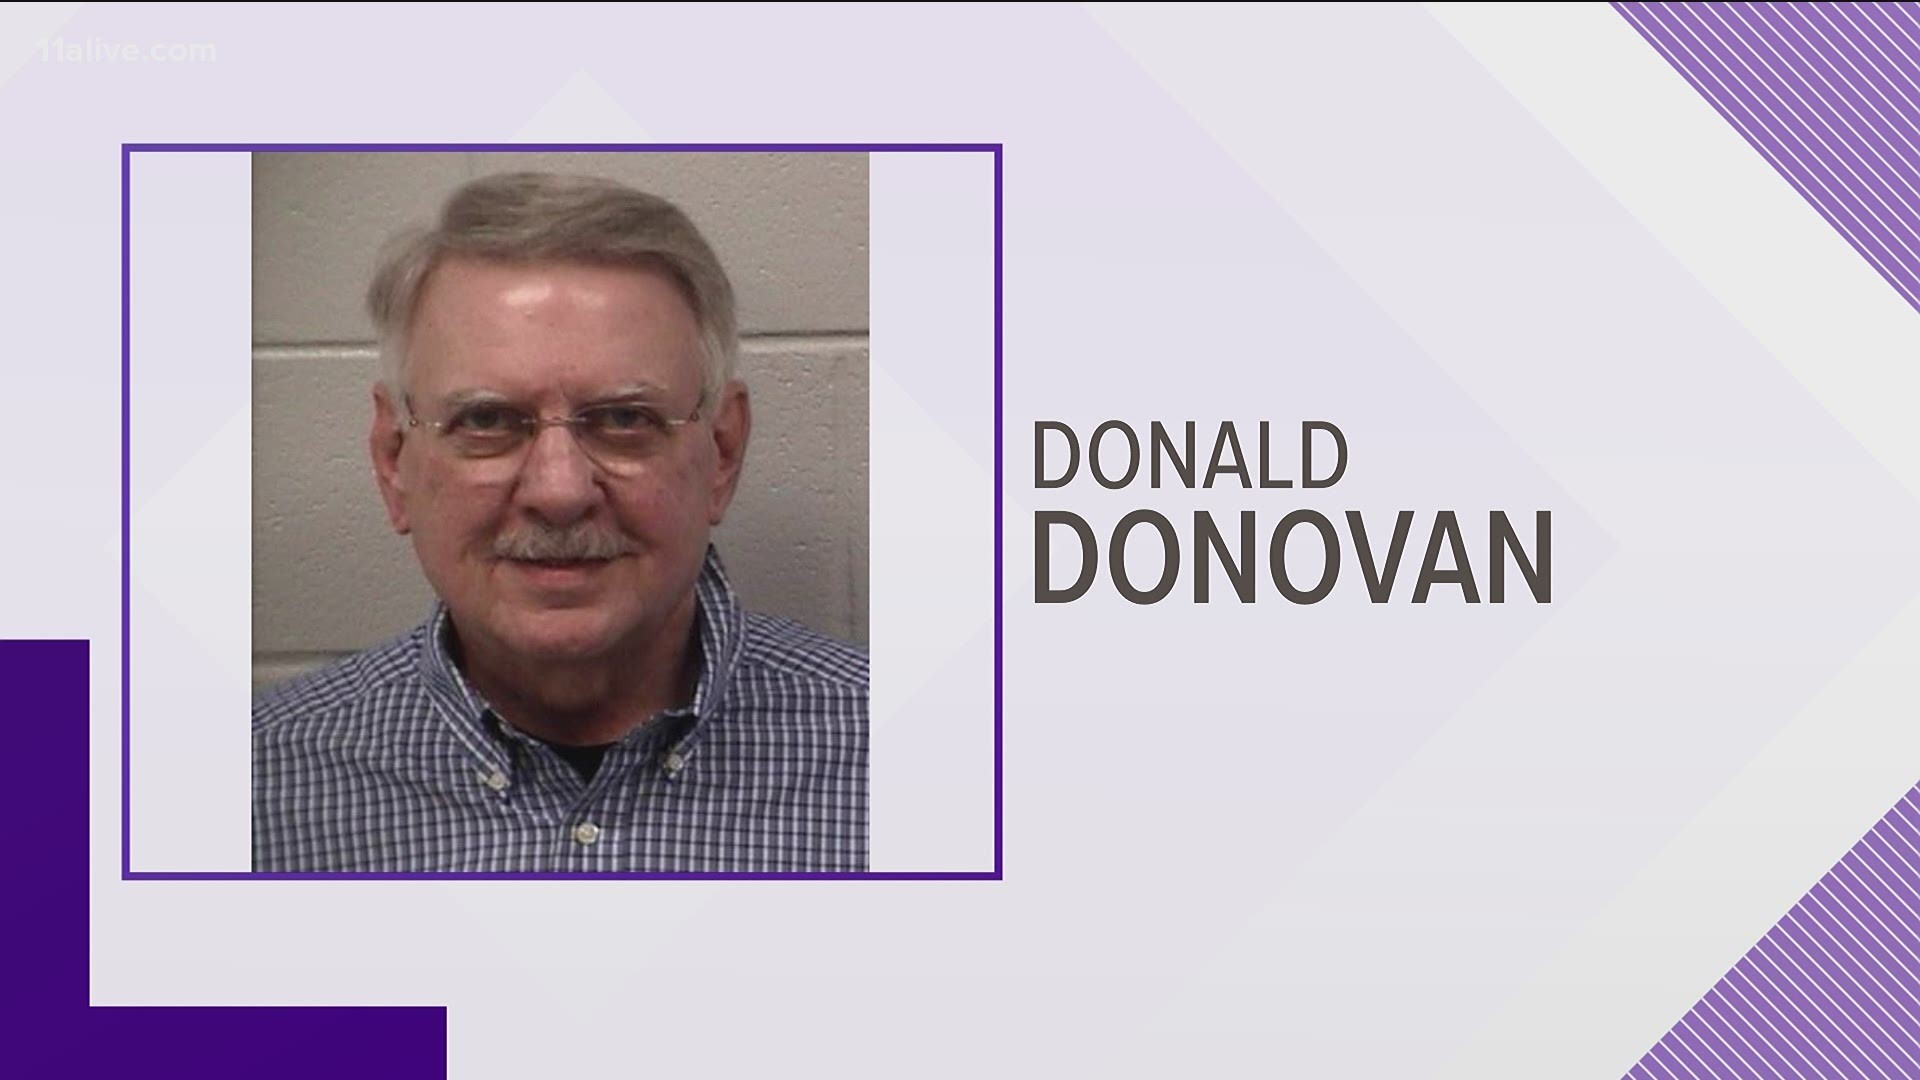 Donald Richard “Dick” Donovan, 75, was booked into jail, Monday. His arrest comes after a judge gave him until noon Tuesday to surrender.